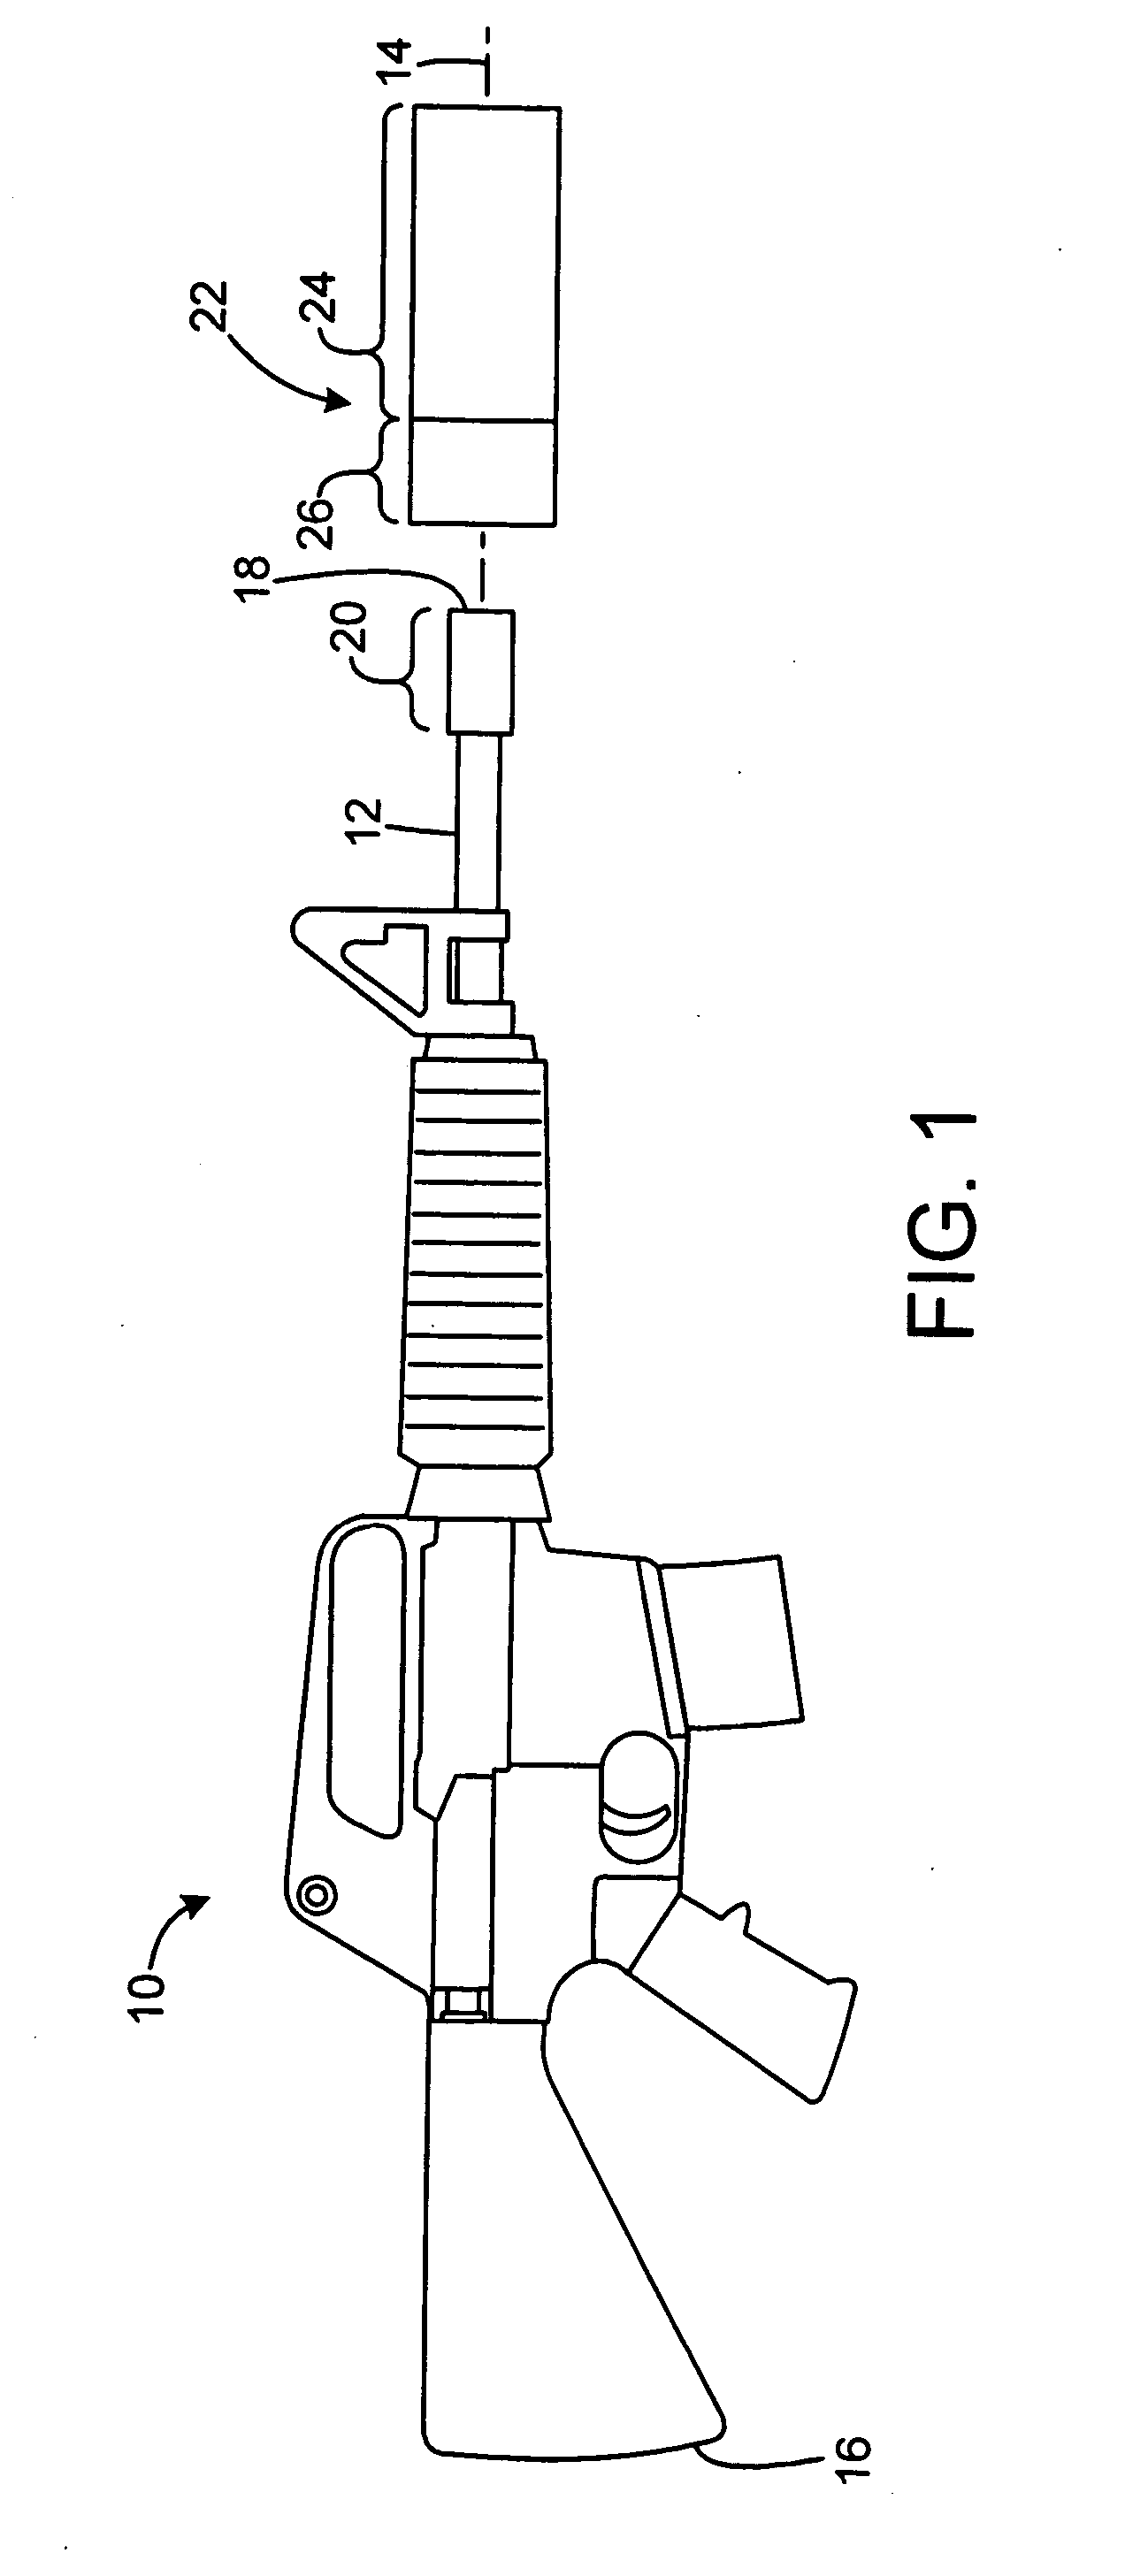 Mounting system for muzzle devices and firearms